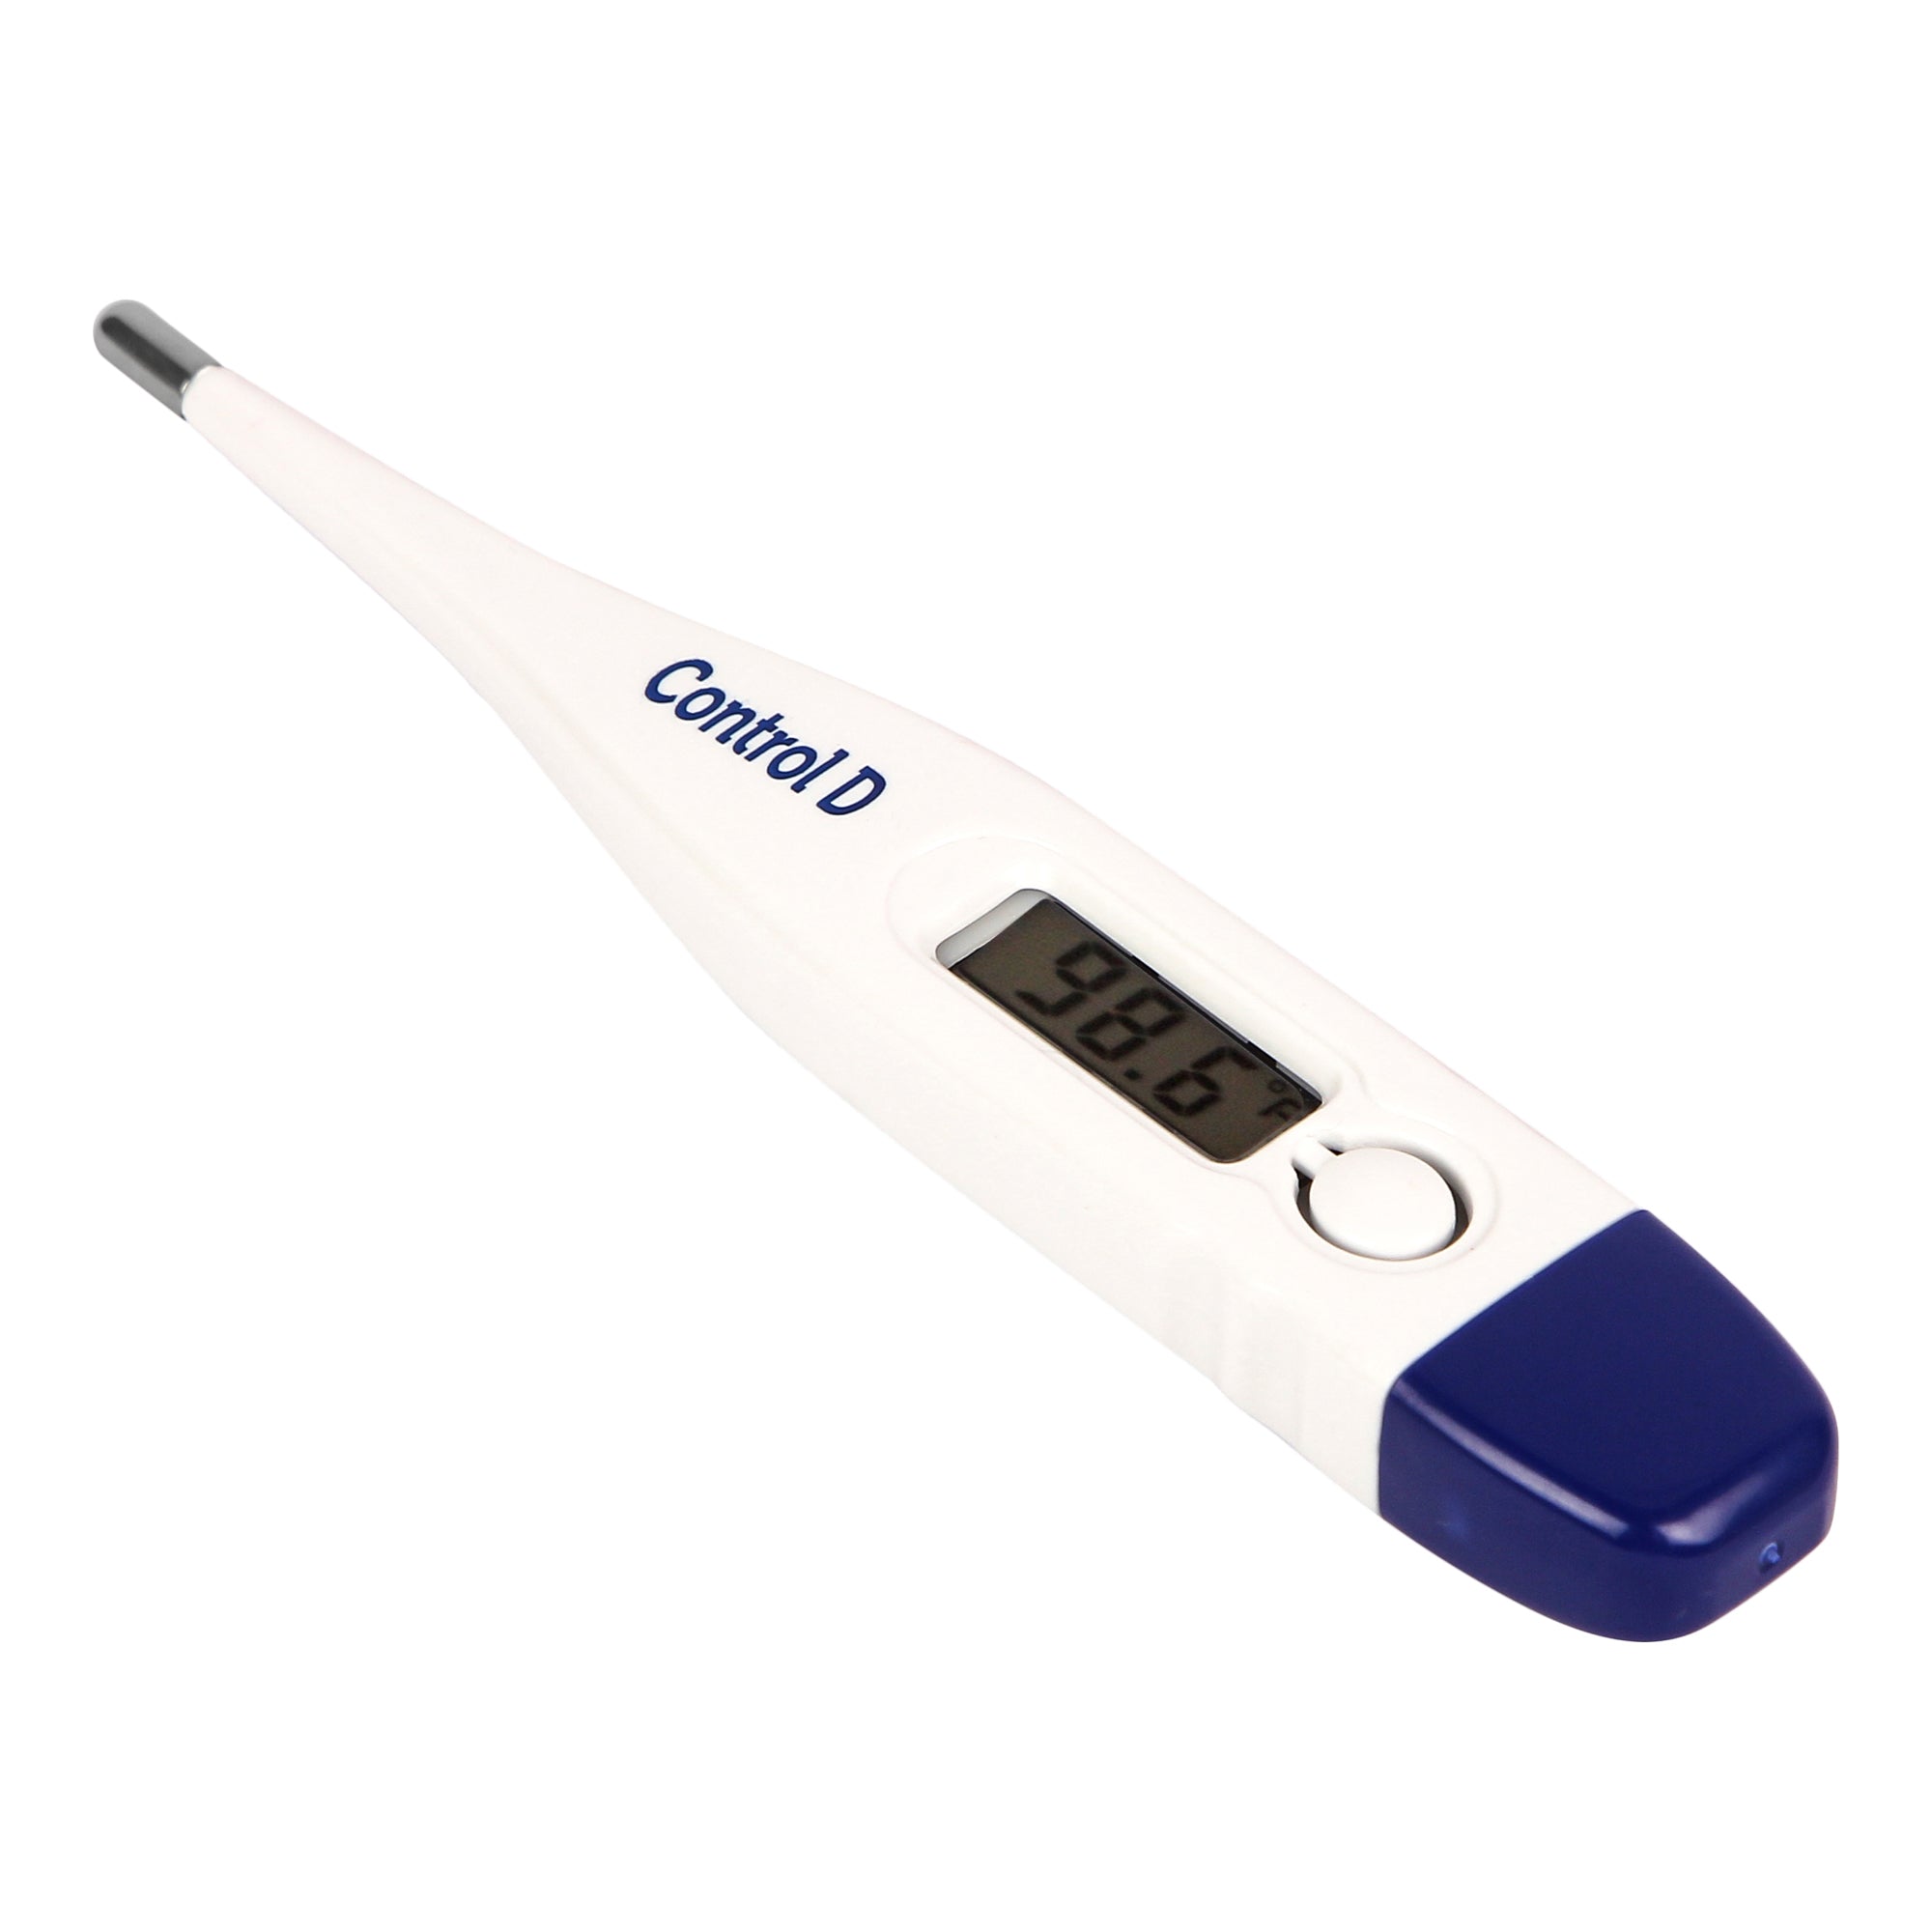 Control D Digital Thermometer